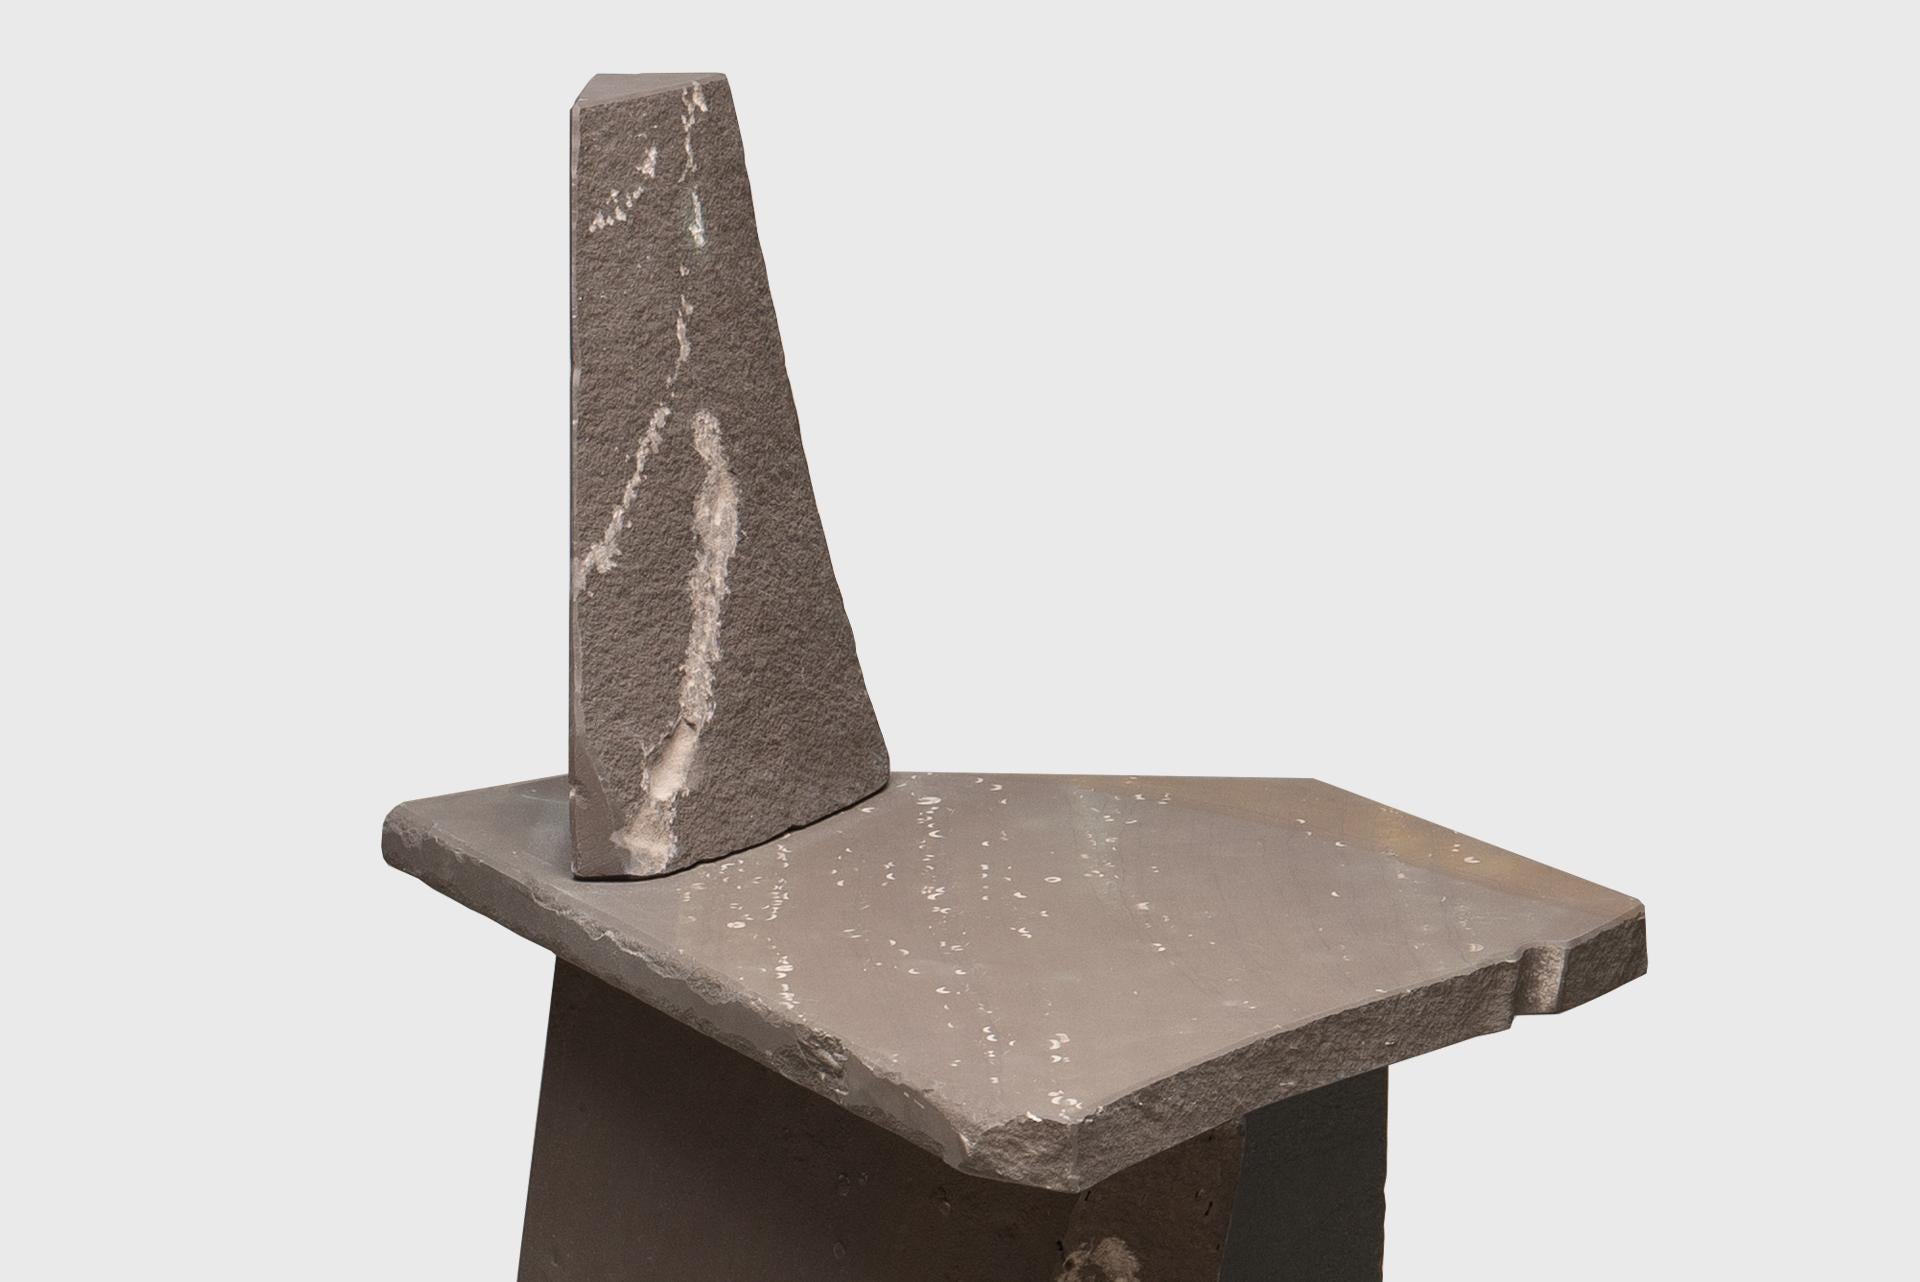 Contemporary Natural Chair 13, Graywacke Offcut Gray Stone, Carsten in der Elst For Sale 5